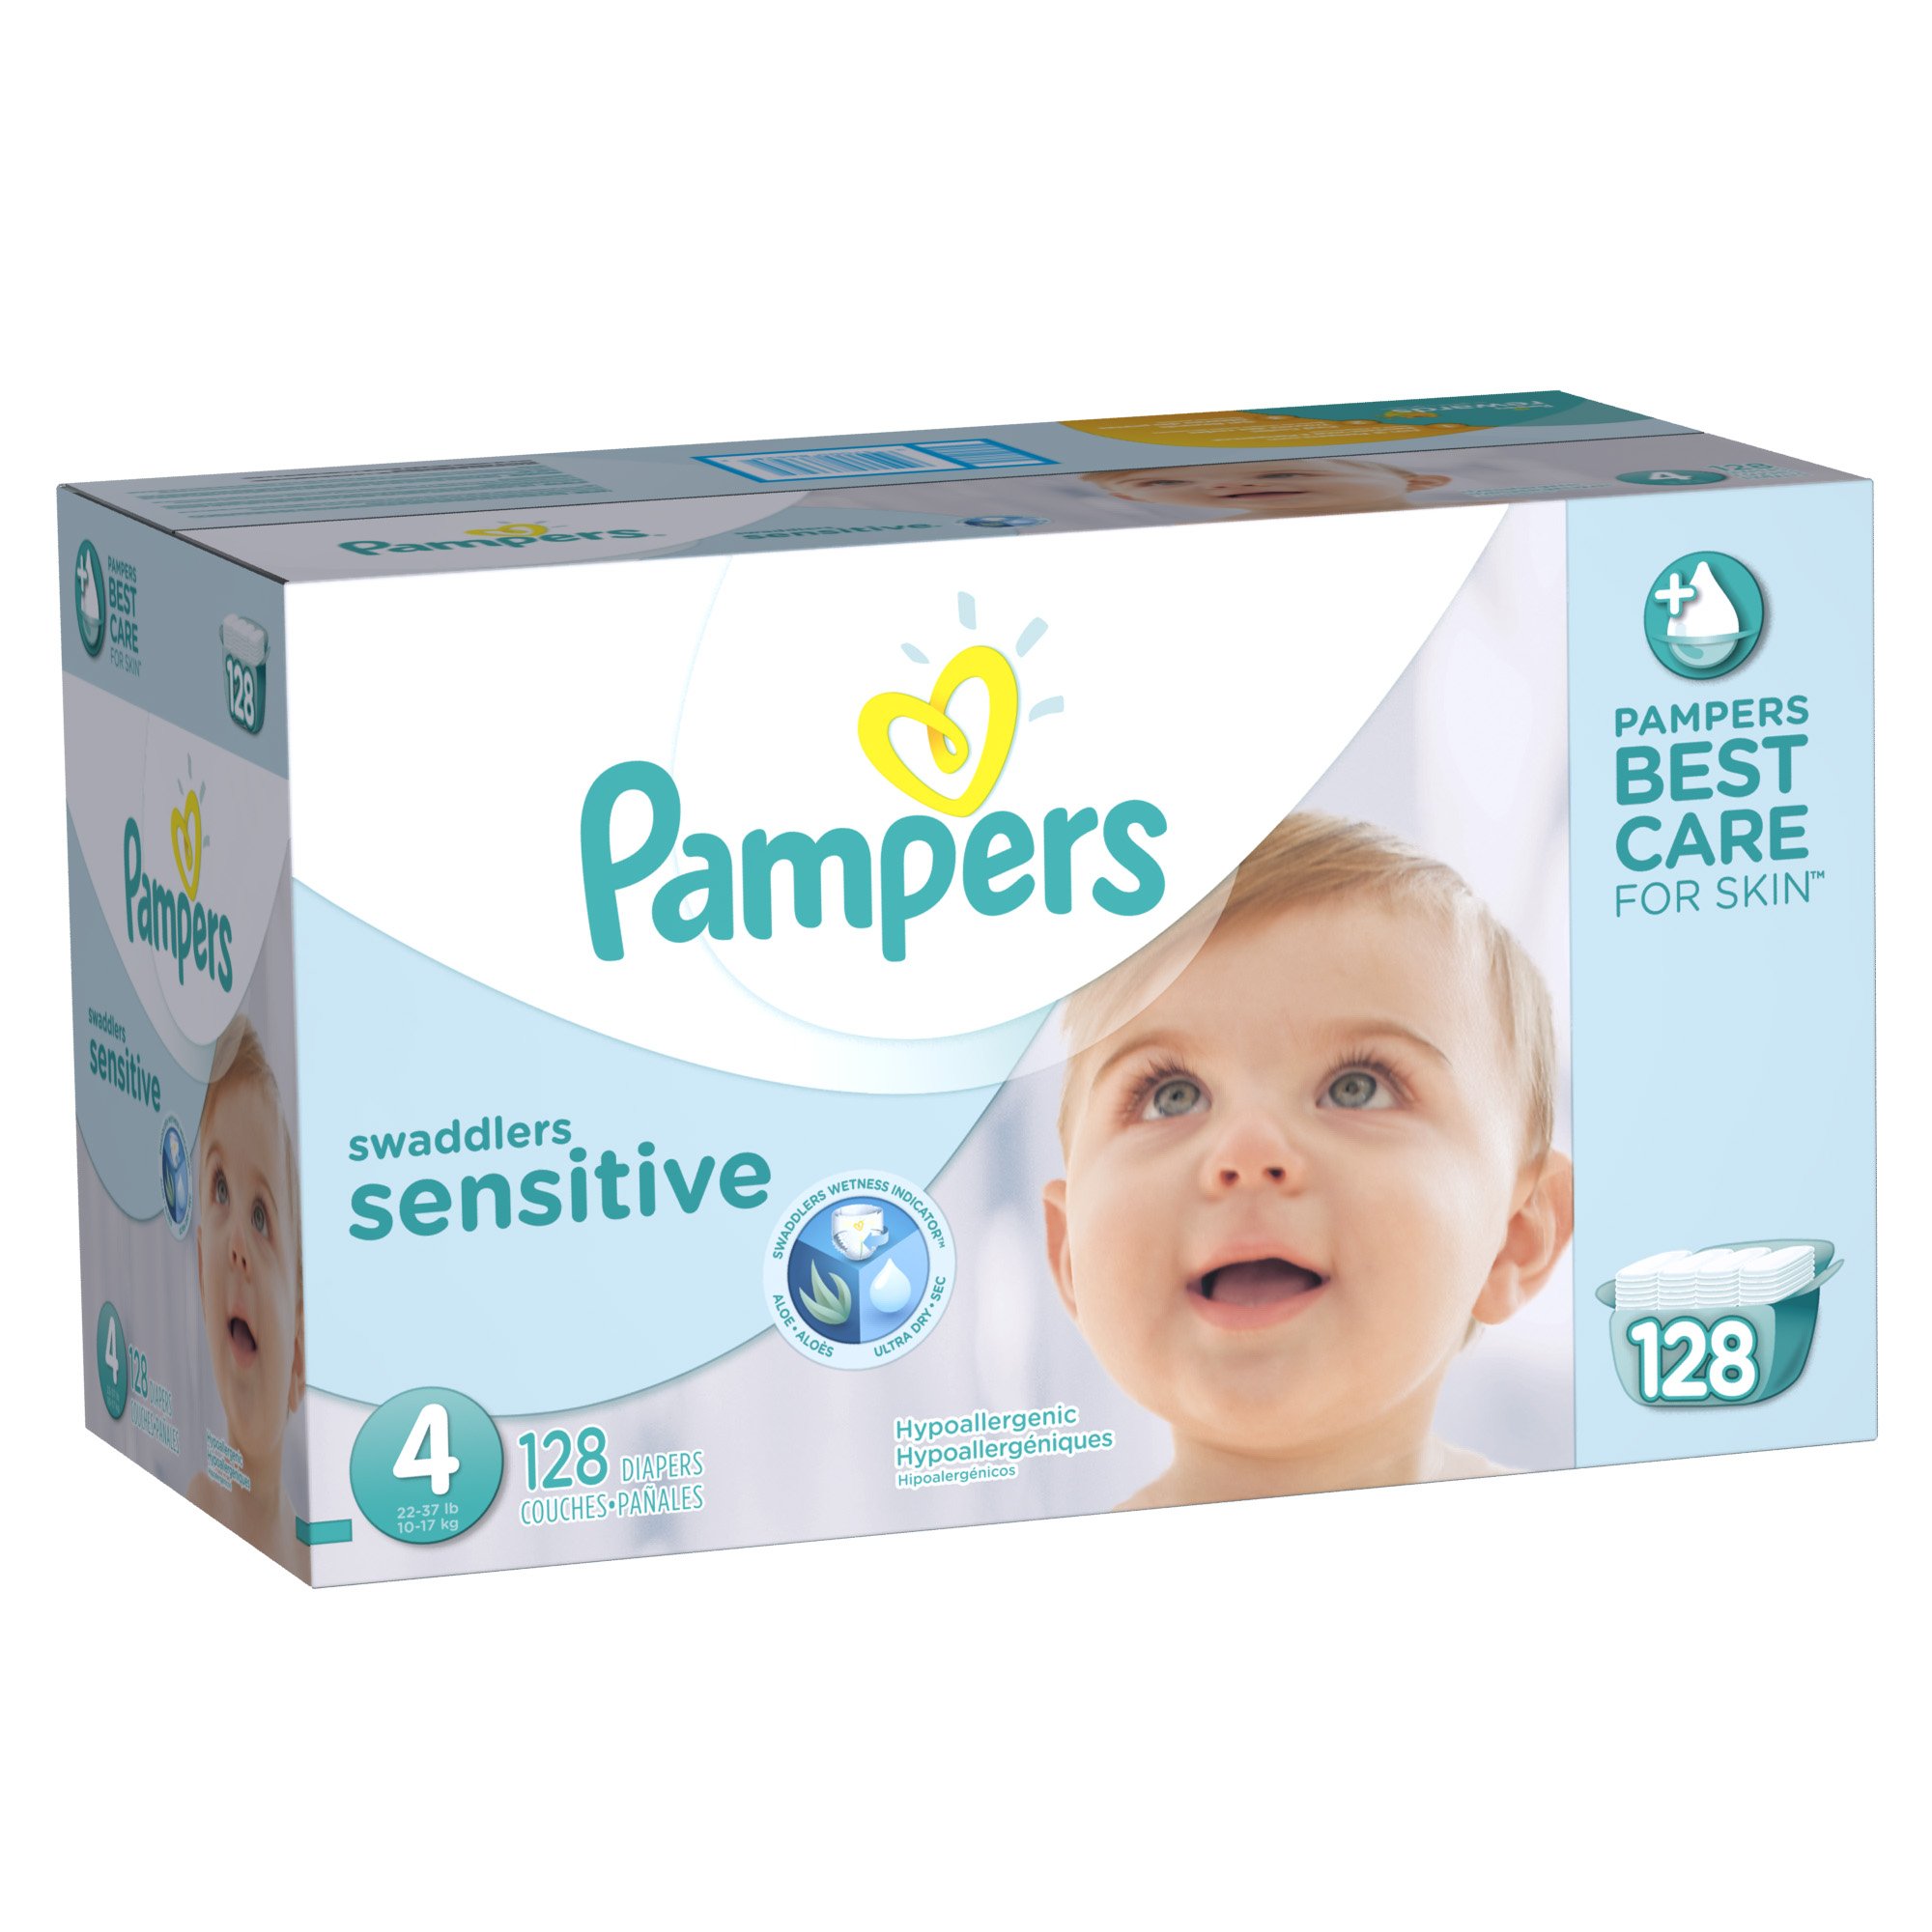 The Best Diapers for Sensitive Skin